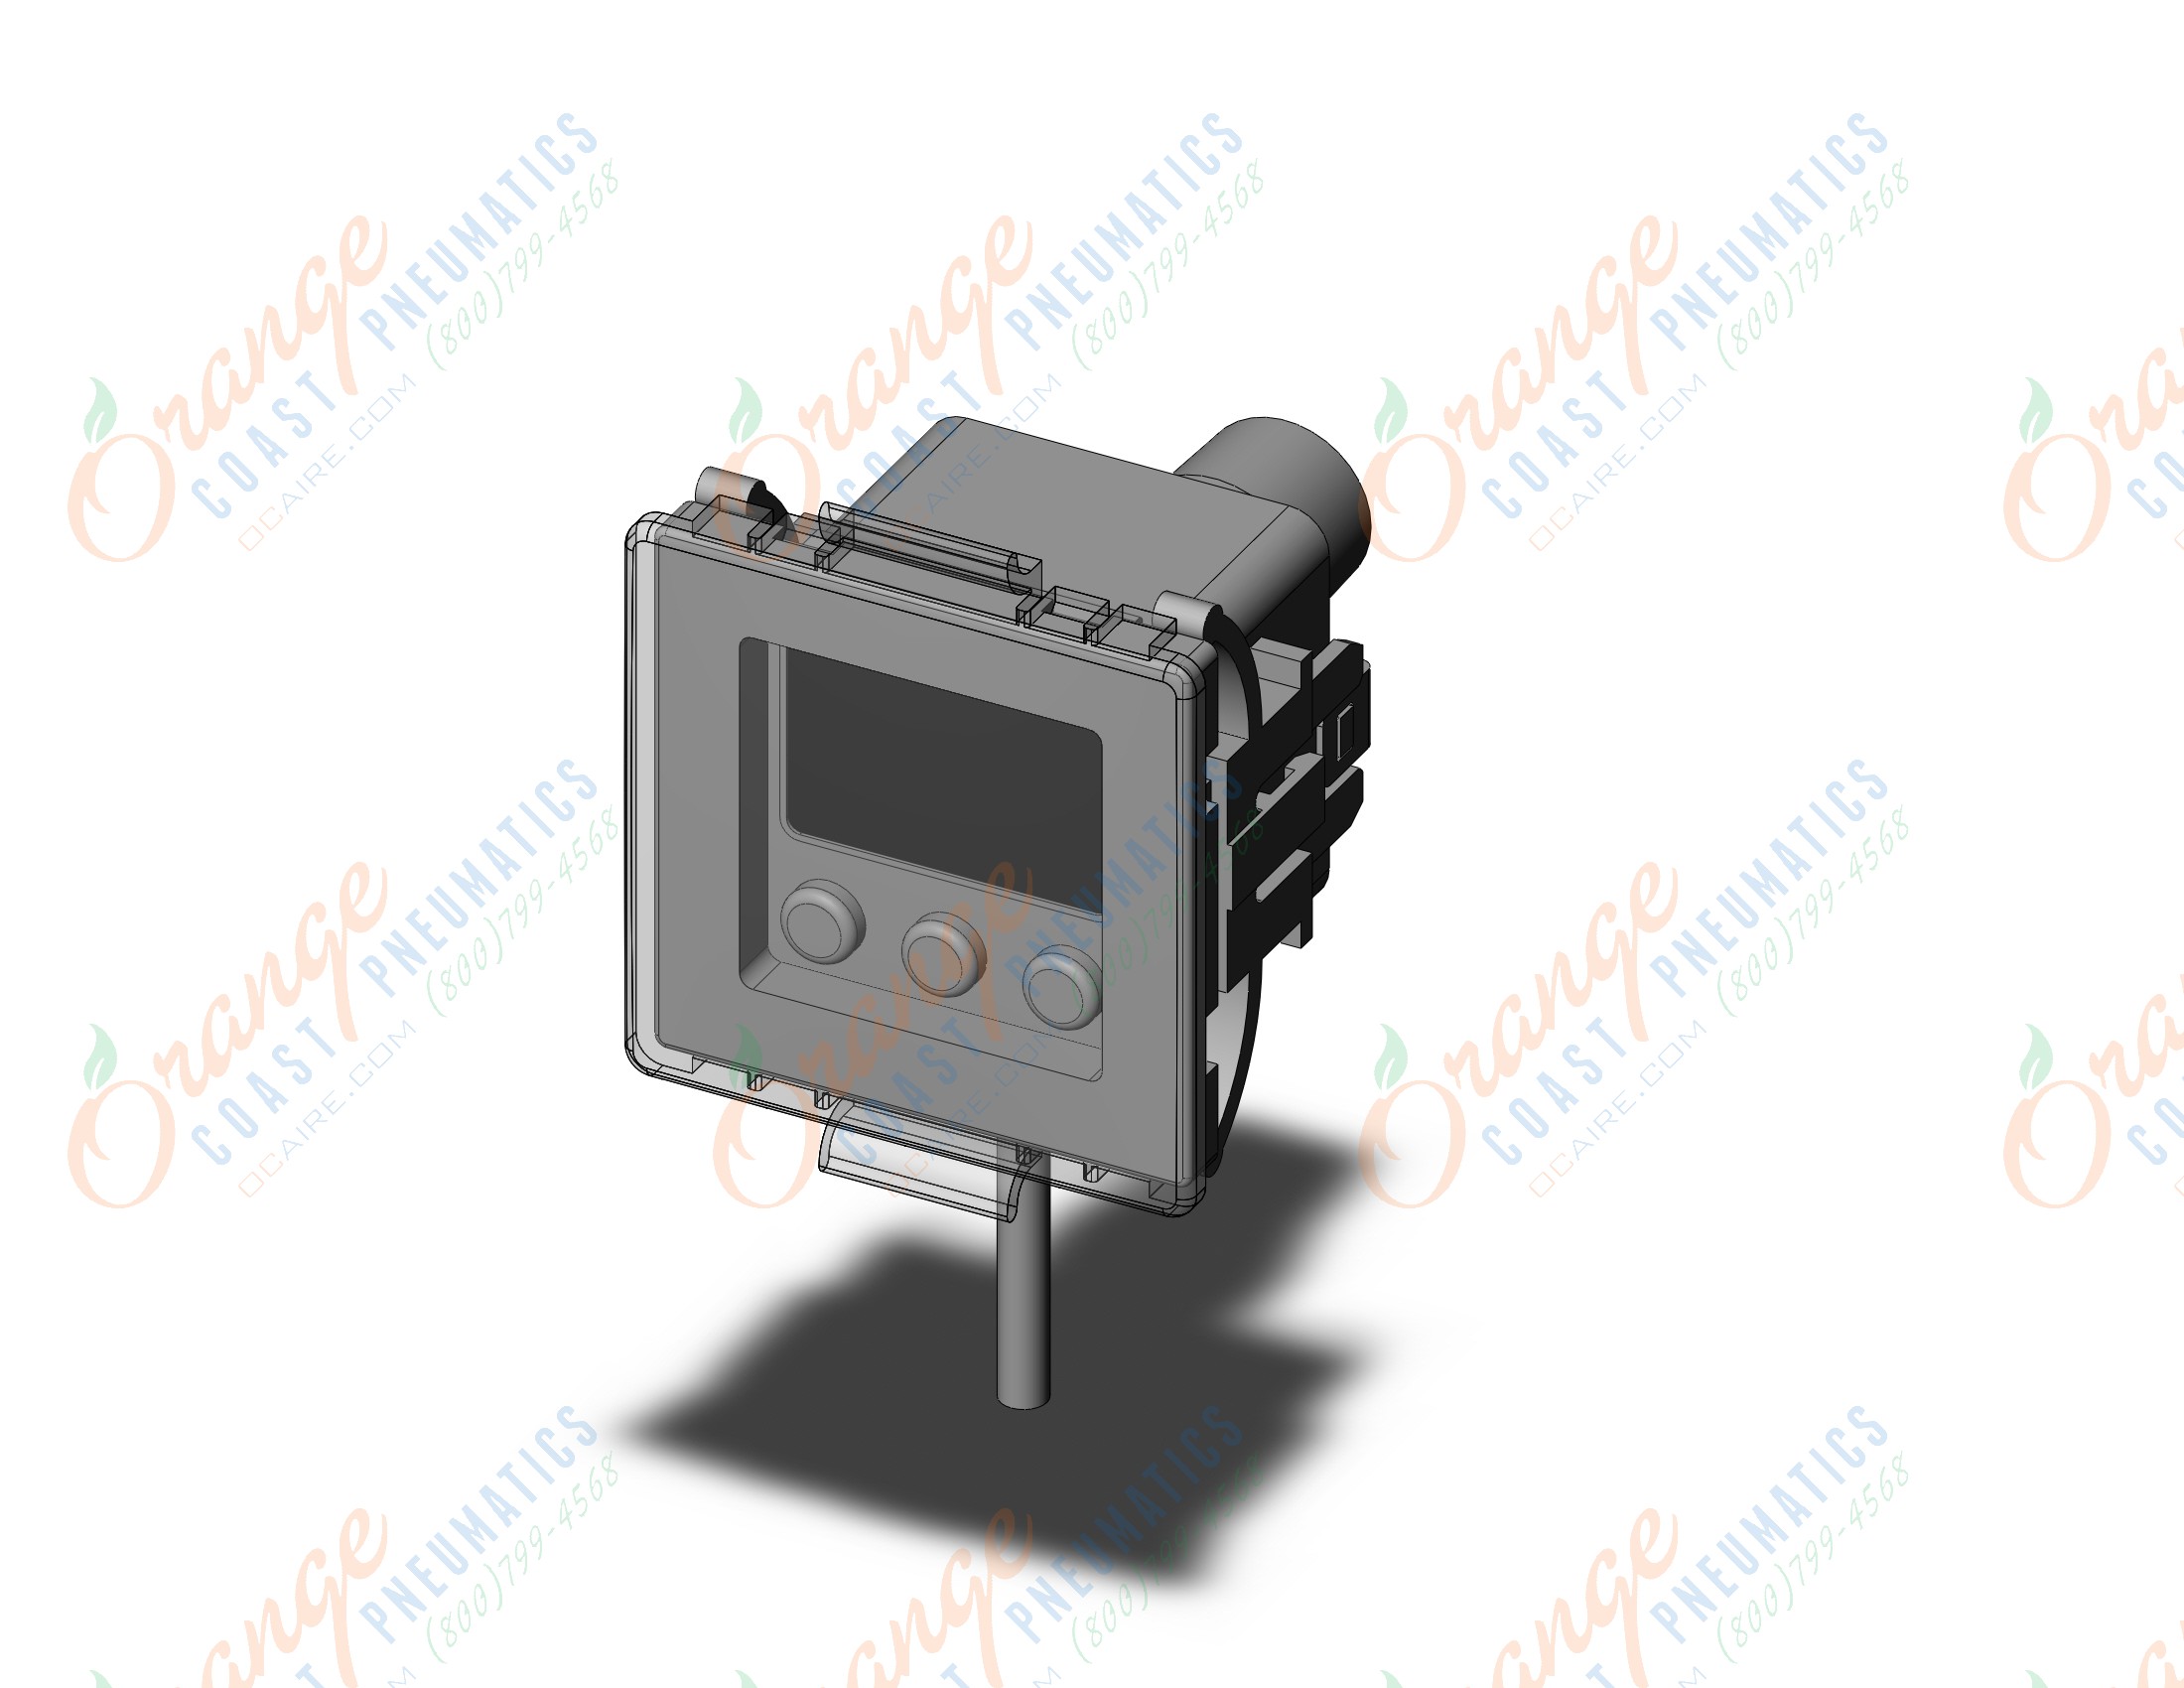 SMC ISE80-N02-A-PDY-X501 2-color digital press switch for fluids, PRESSURE SWITCH, ISE50-80